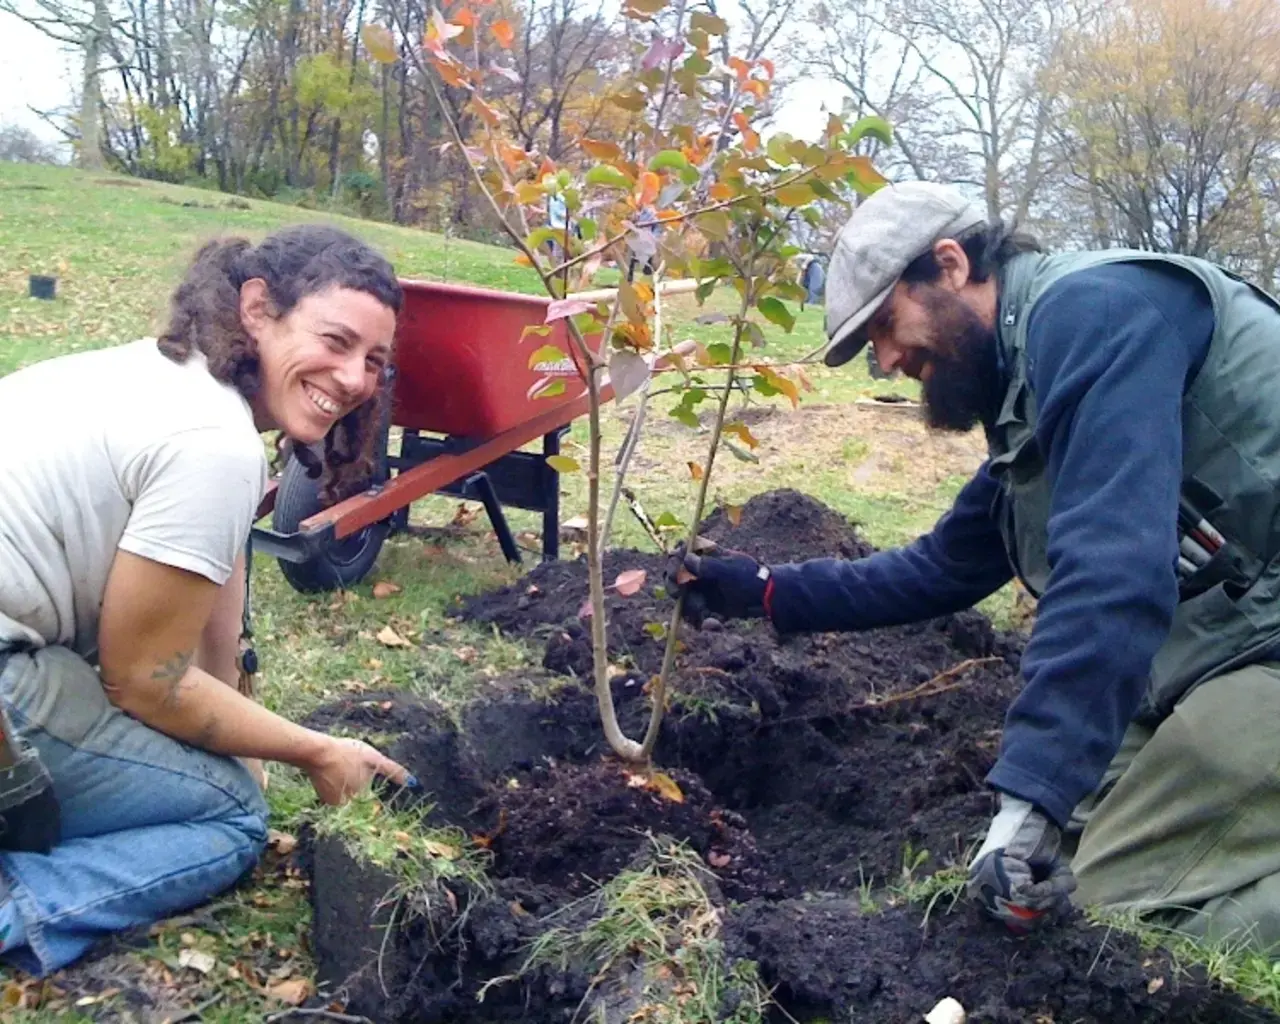 The planting one of 37 fruit trees in the new Bartram&#39;s Orchard, with help from Philadelphia Orchard Project volunteers on November 15, 2011. Photo courtesy of Bartram&#39;s Garden.